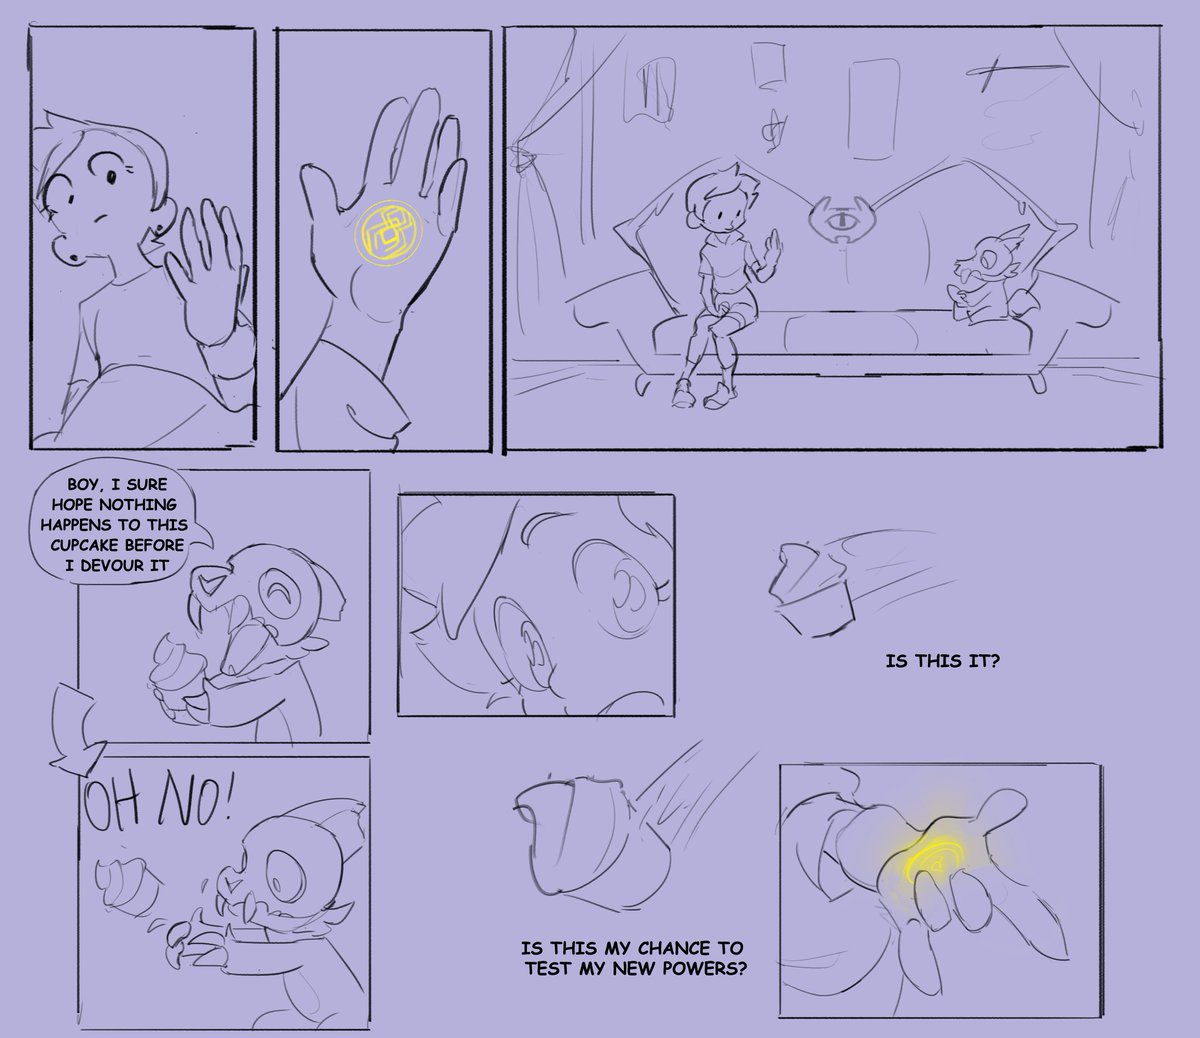 Casually scribbles out a silly origin story for the previous tweet. good comic layout practice. #TheOwlHouse #LuzNoceda 

https://t.co/WmG7QijNU3 